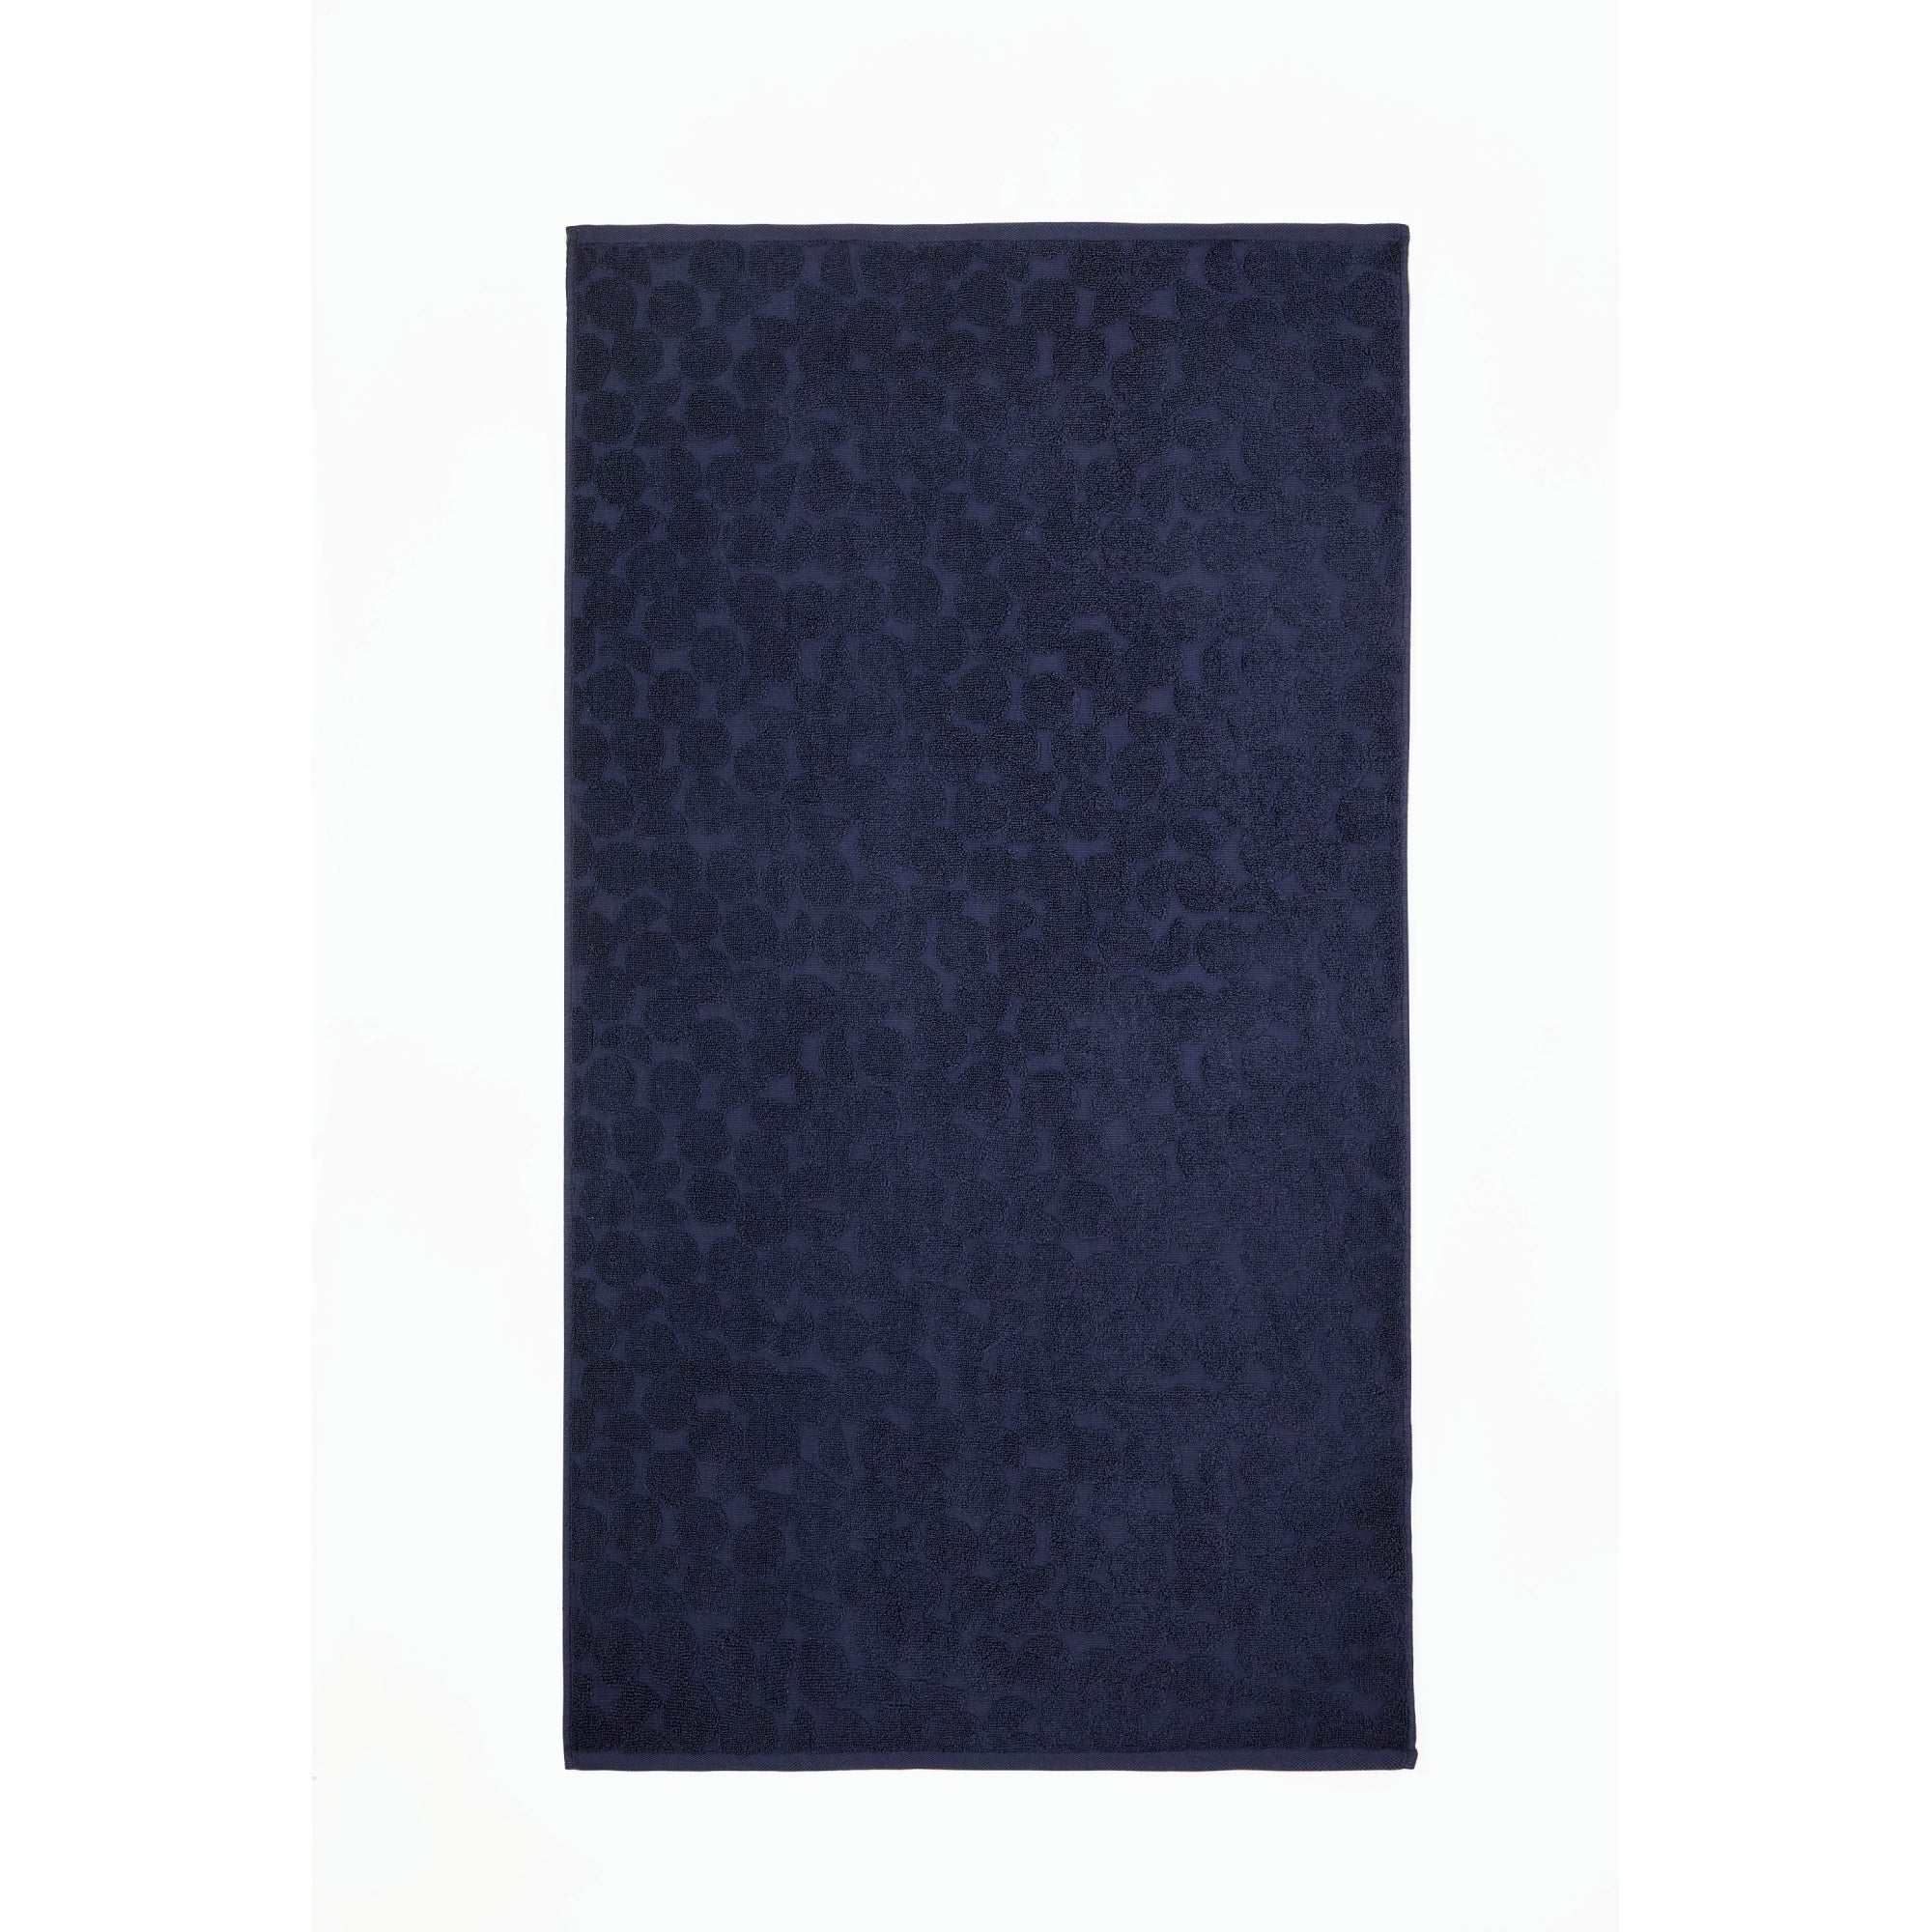 Hand Towel Ingo by Fusion in Navy